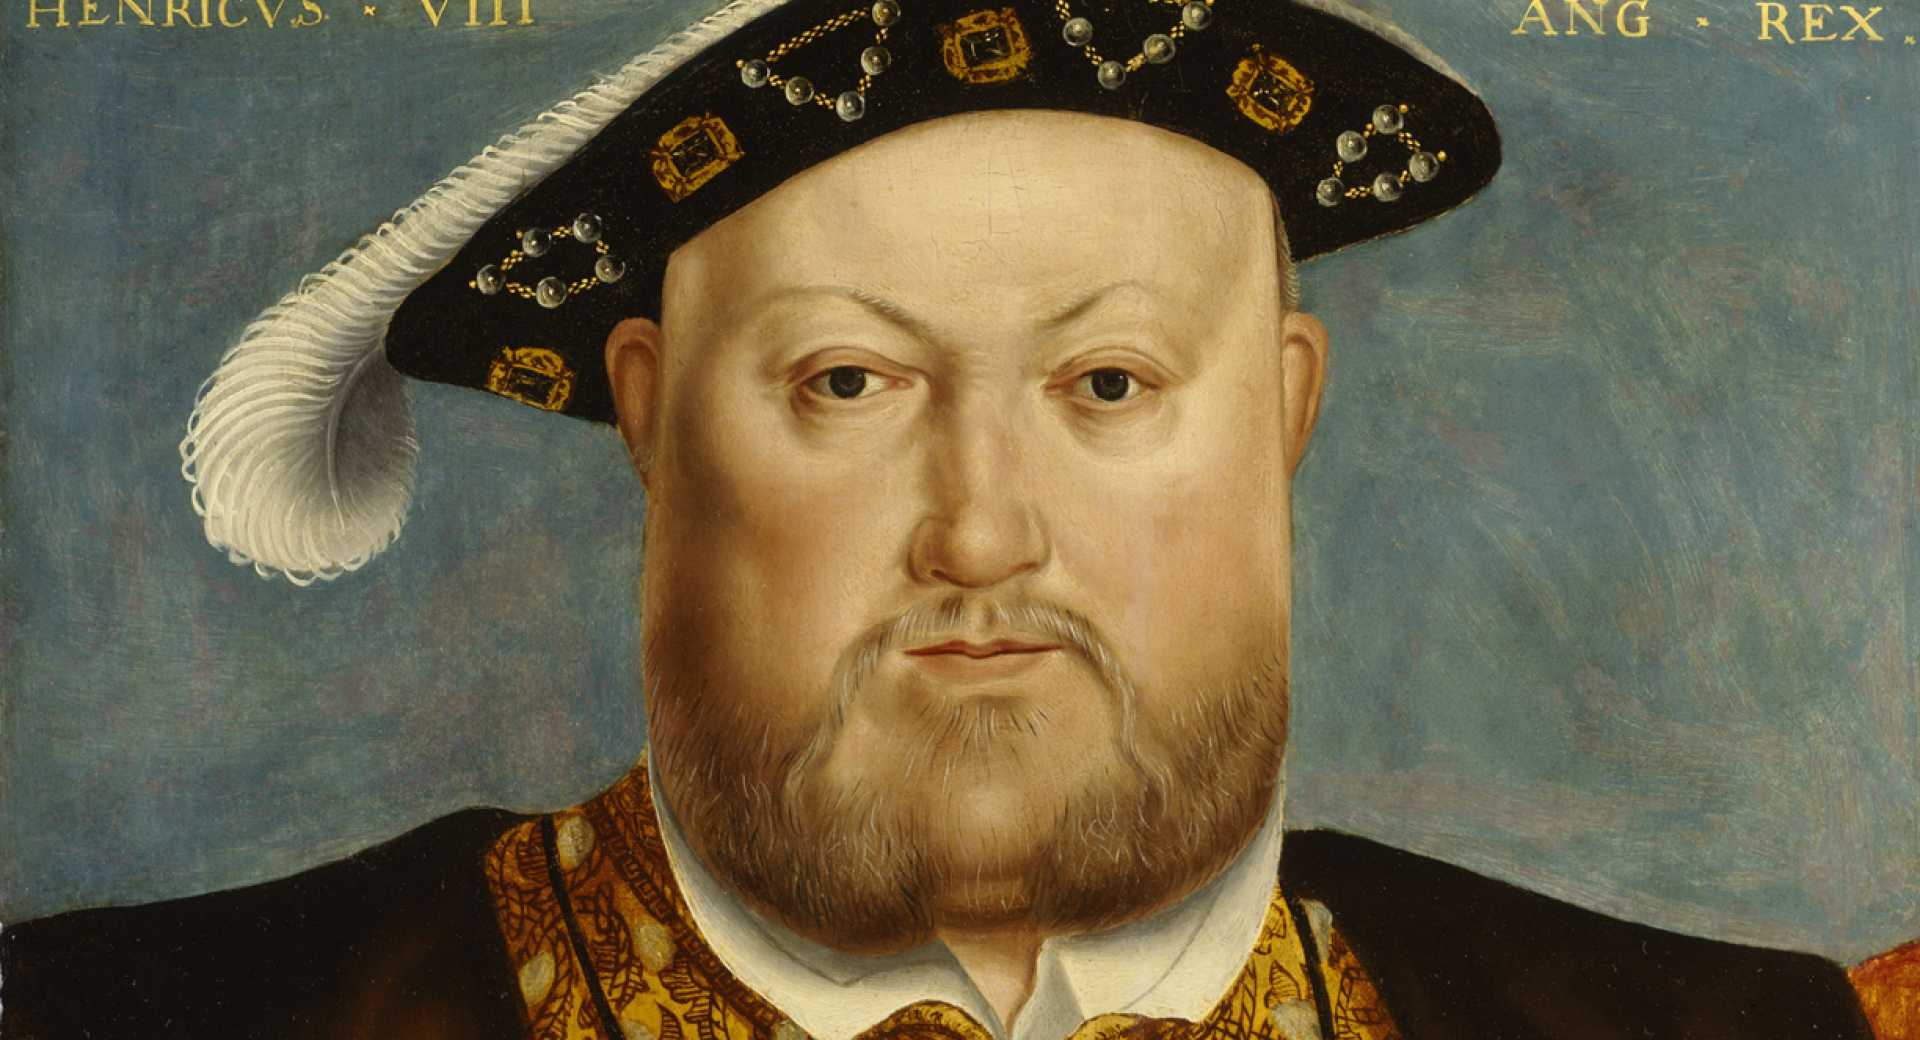 Painting of Henry VIII by Hans Holbein